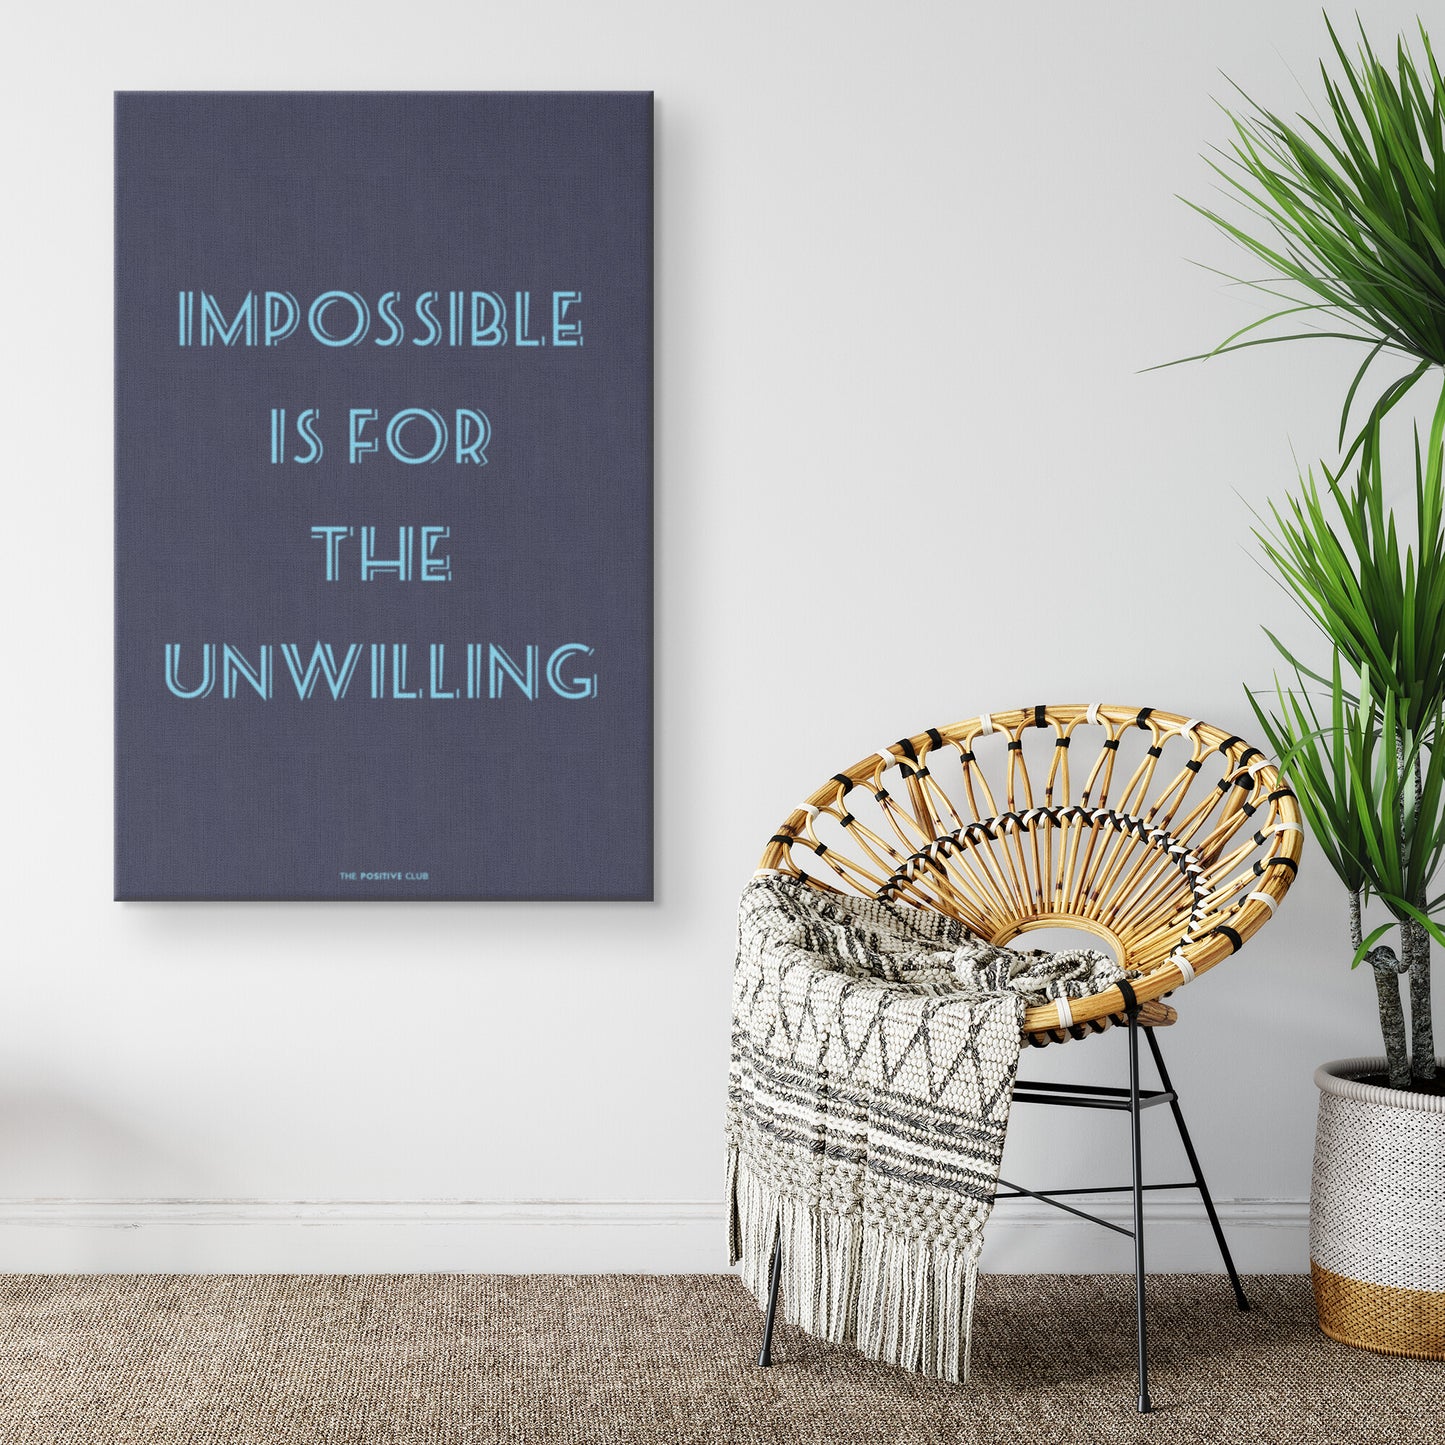 IMPOSSIBLE IS FOR THE UNWILLING